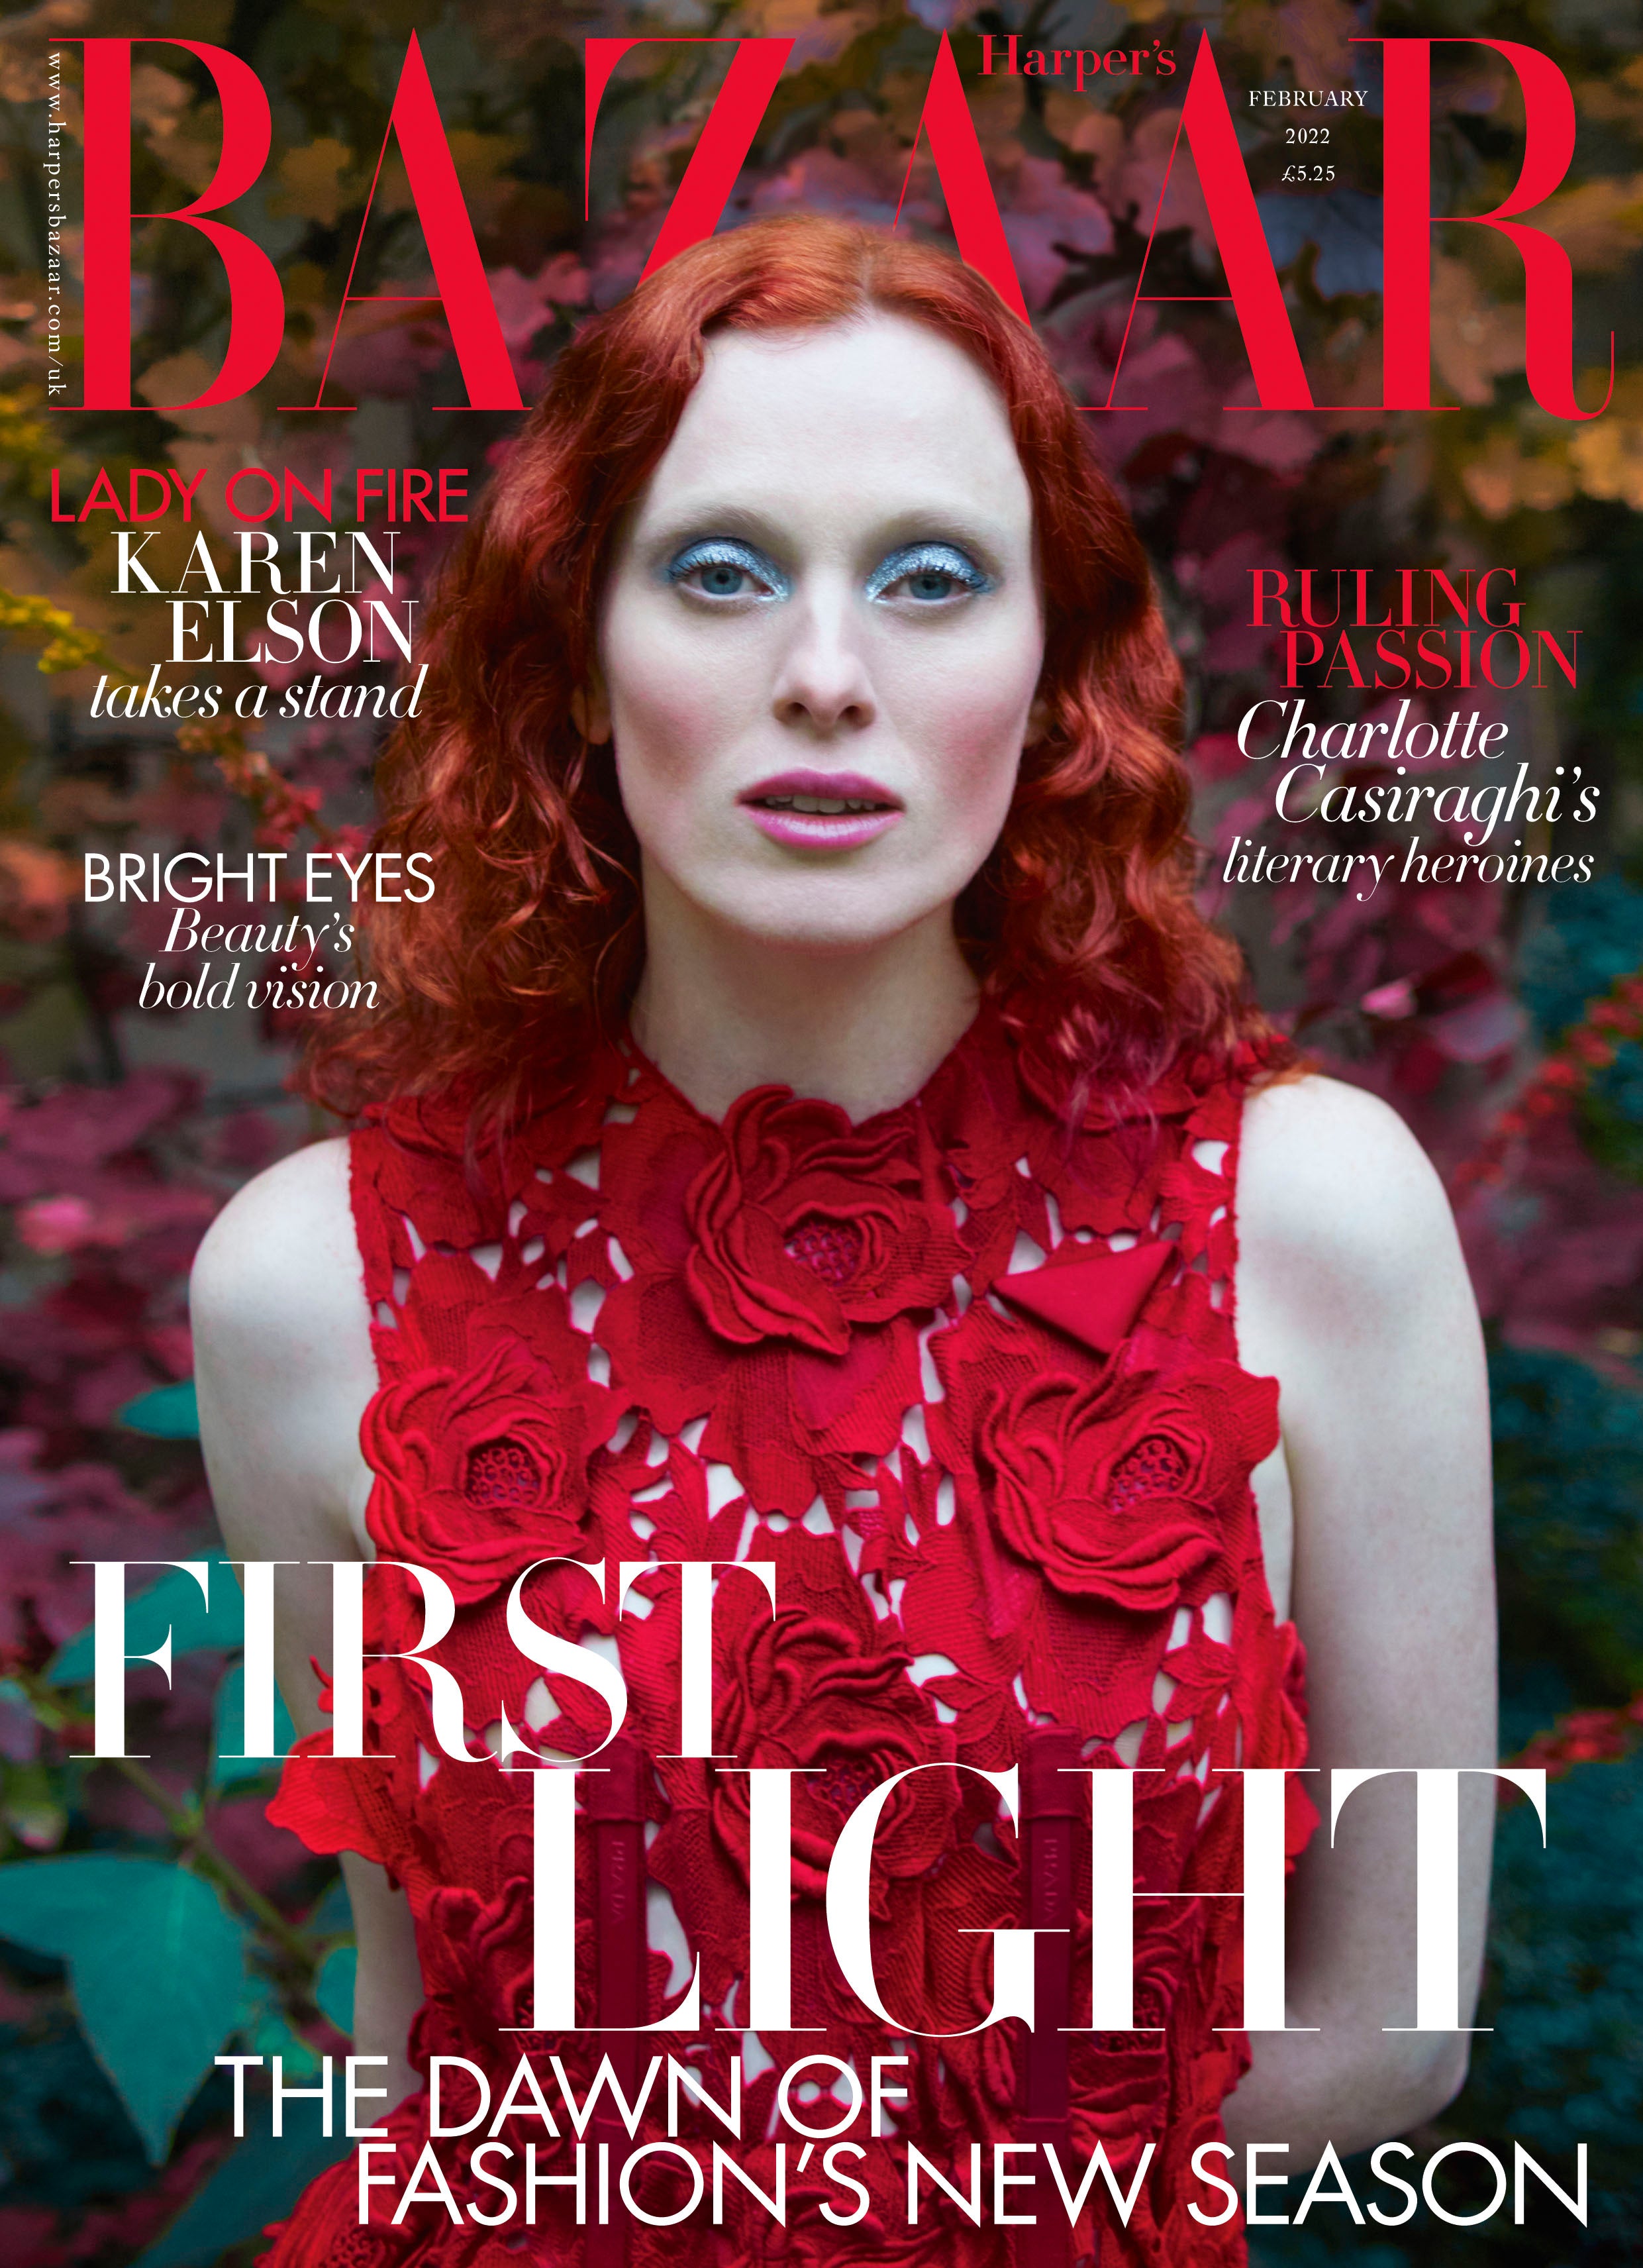 The cover of the February 2022 issue of Harper’s Bazaar UK